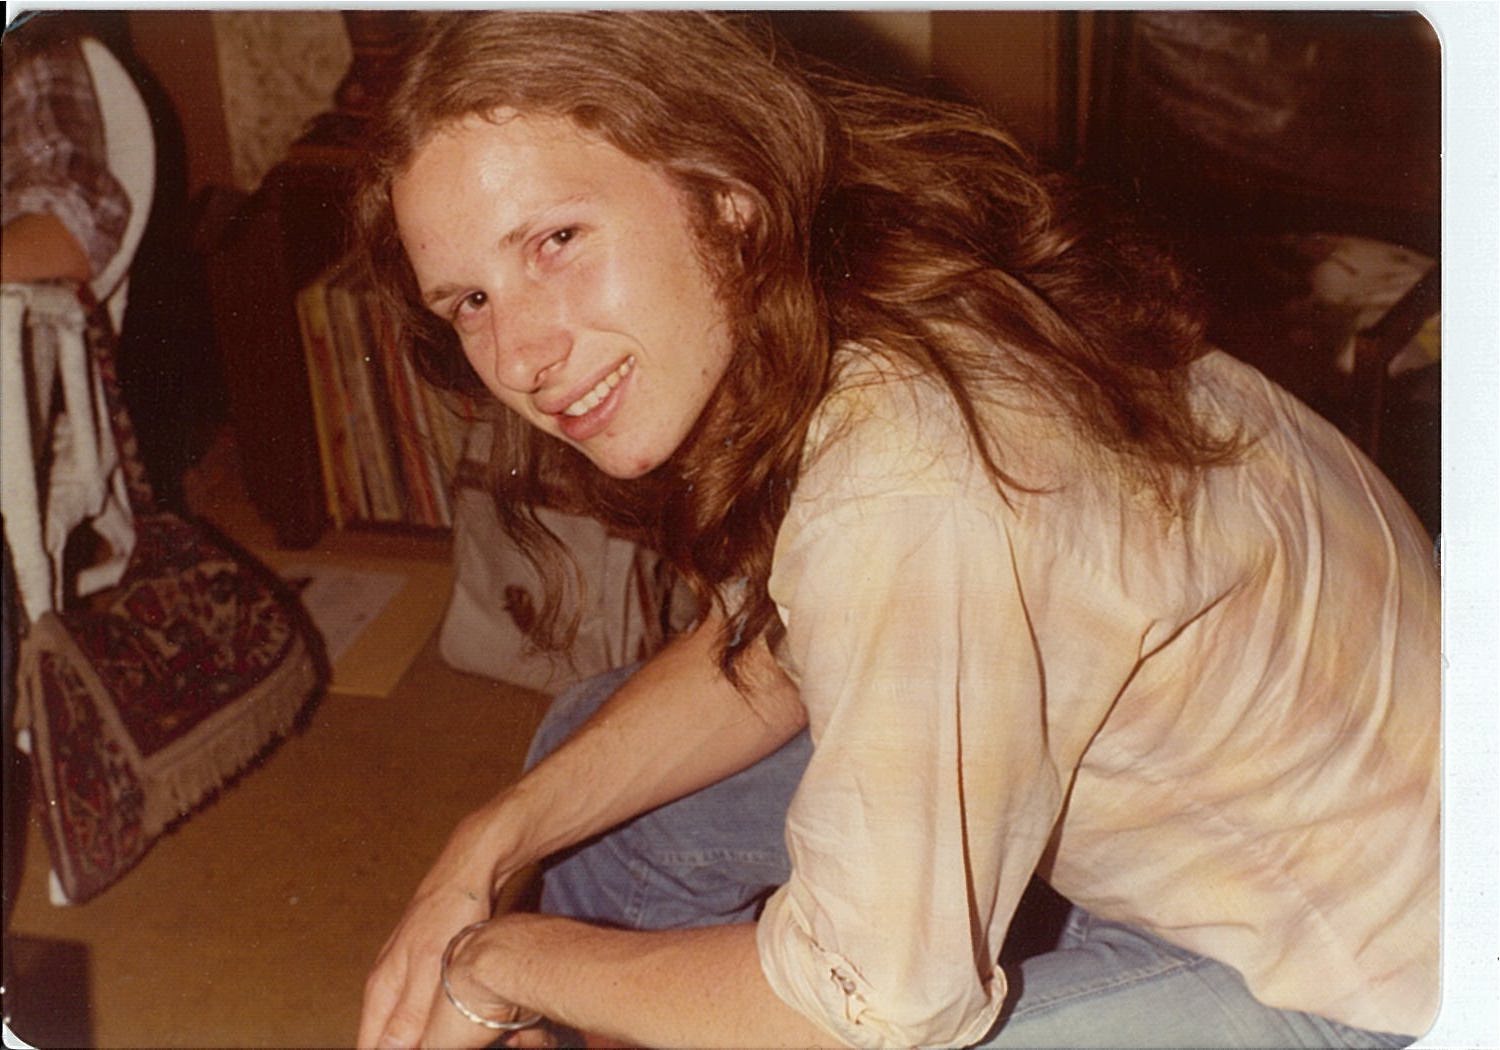 1970s person with long hair seated and turning sideways to look at the camers